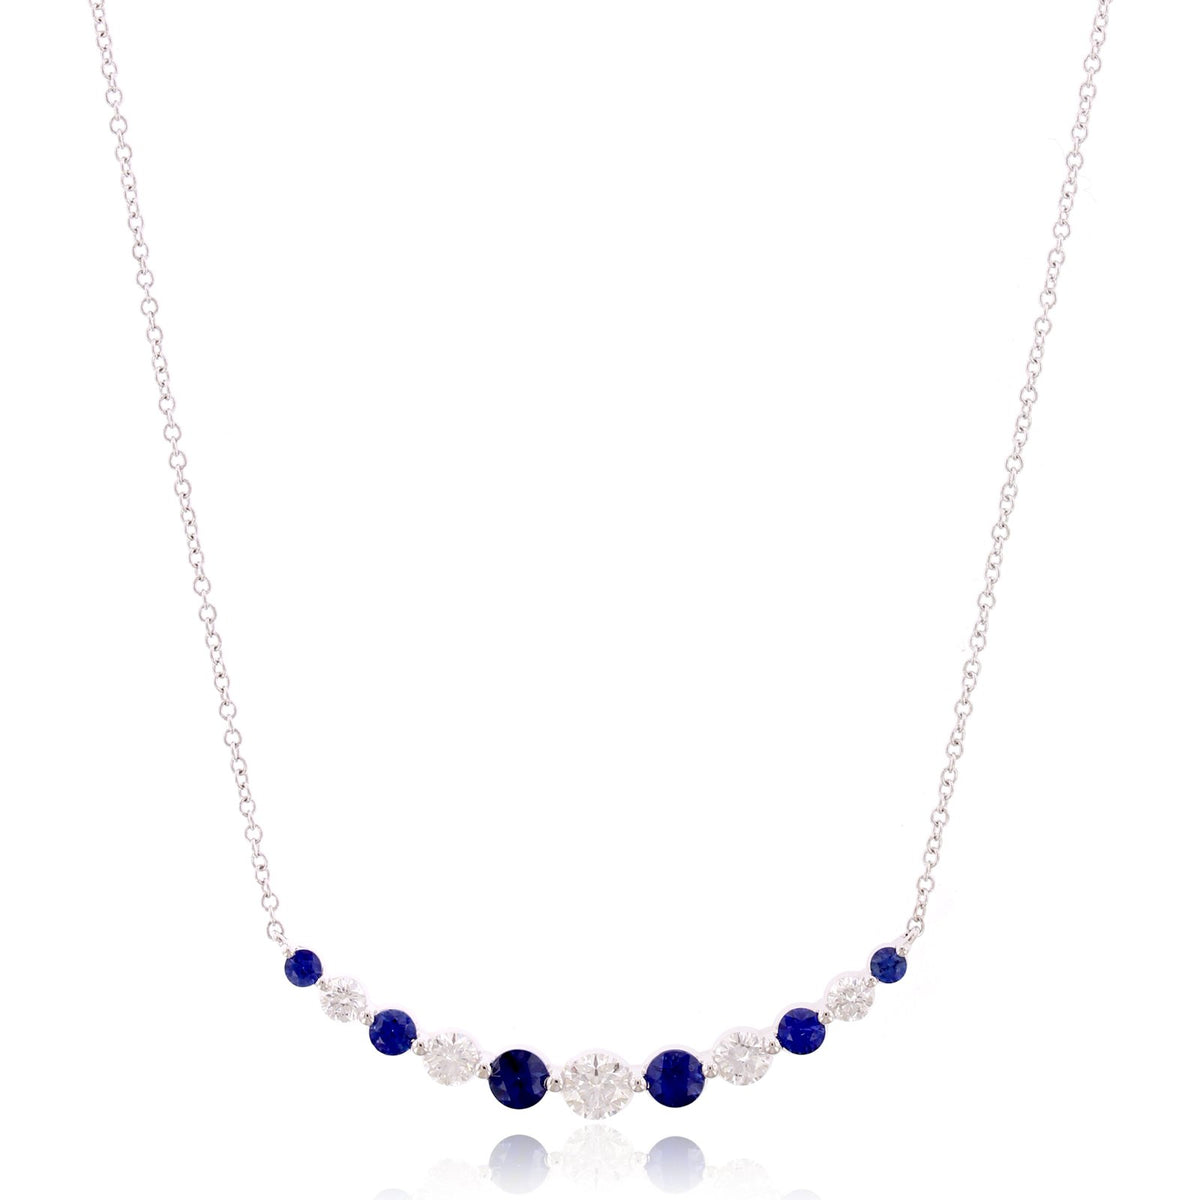 18K White Gold Diamond and Sapphire Curve Necklace